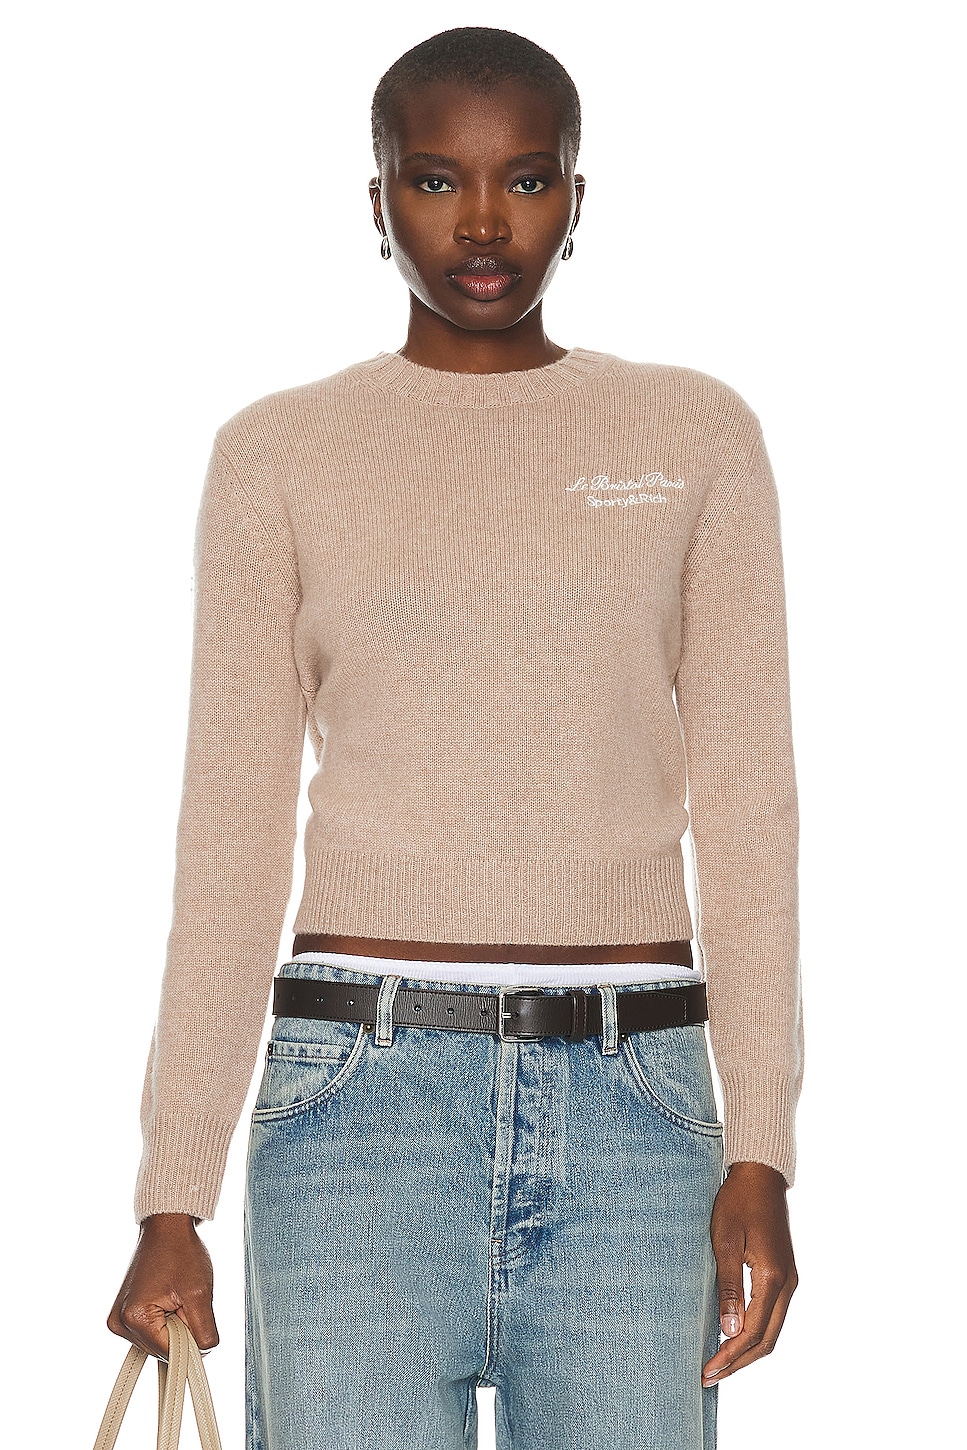 Image 1 of Sporty & Rich X Le Bristol Paris Faubourg Cashmere Crewneck Sweater in Heather Oatmeal White